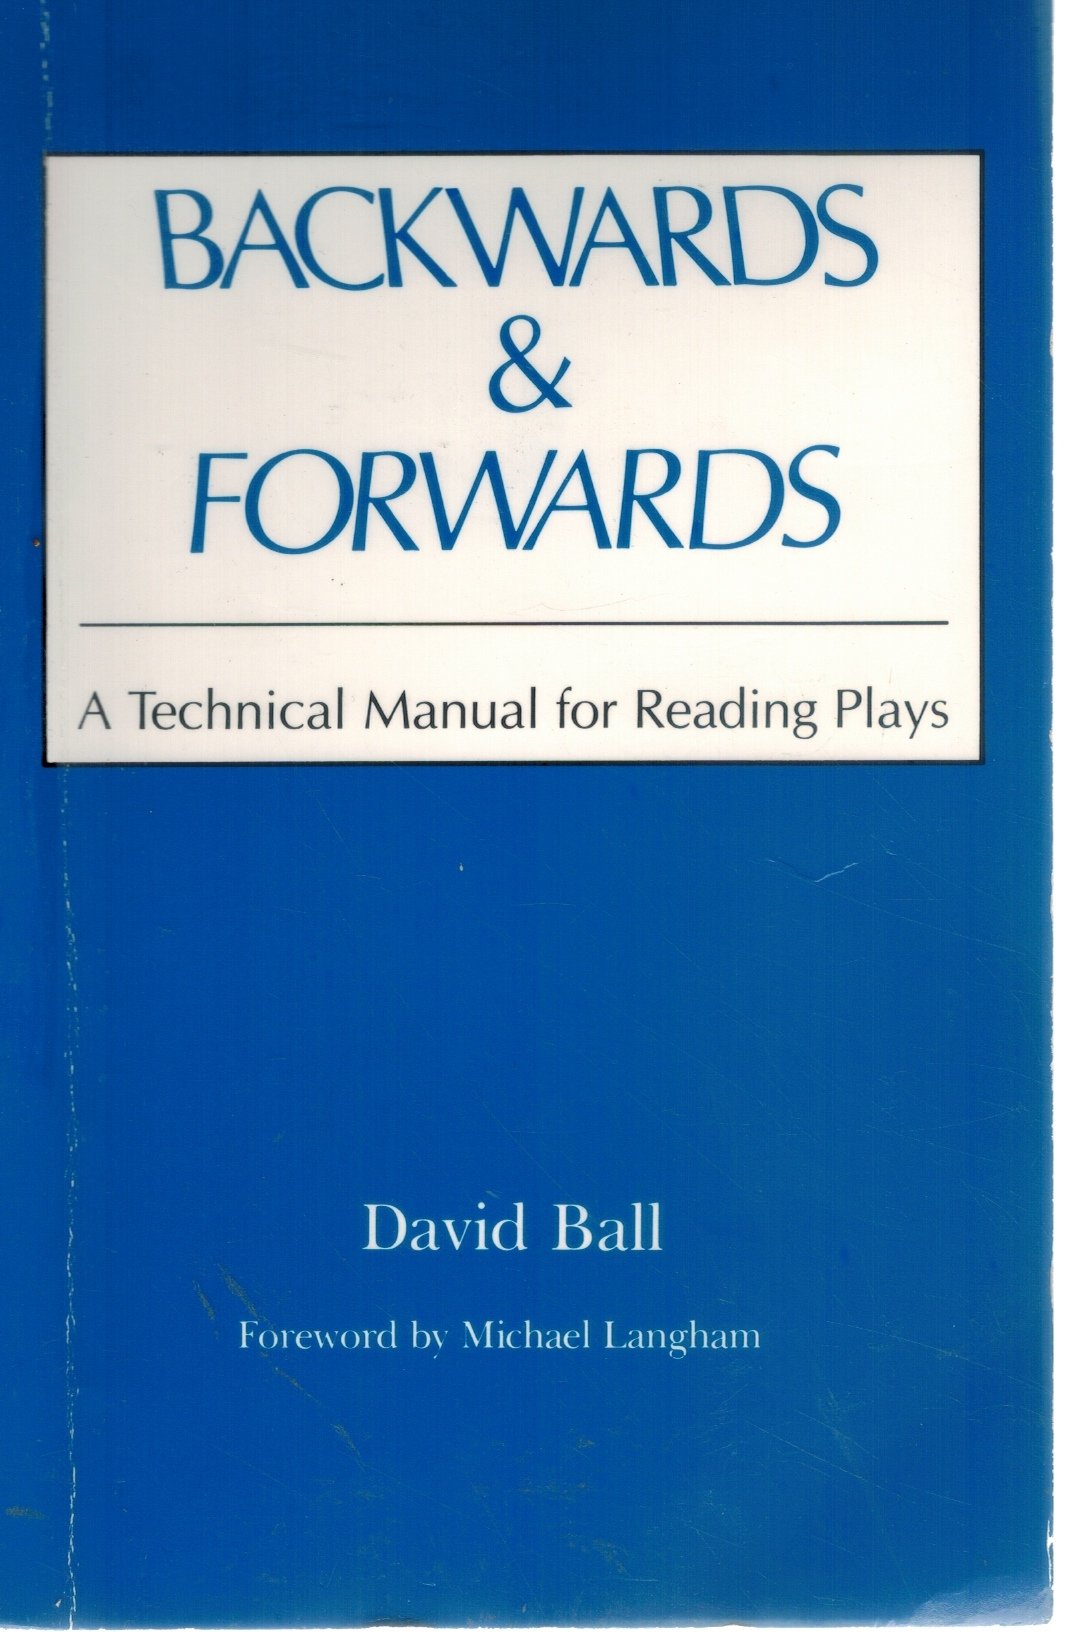 Backwards & Forwards  A Technical Manual for Reading Plays  by Ball, David & Michael Langham